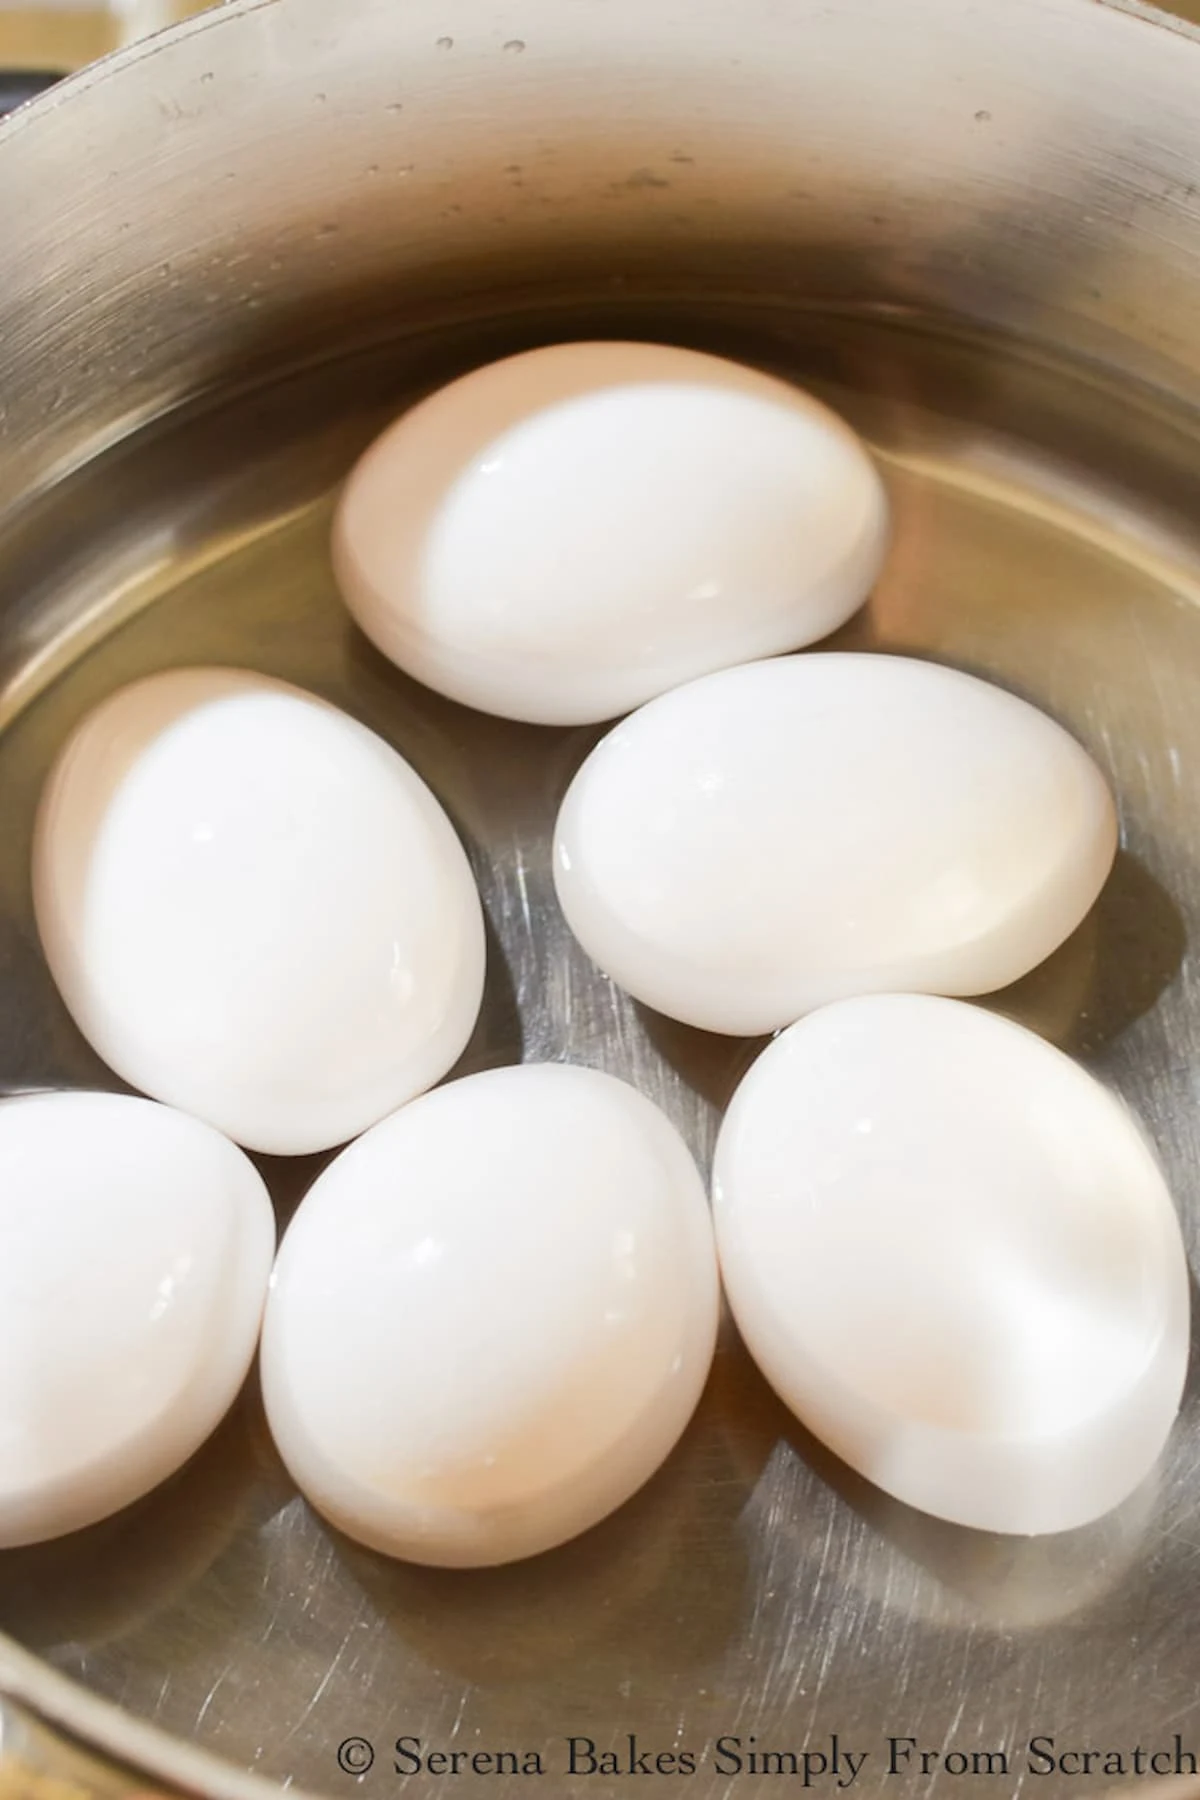 6 whole Eggs in a stainless steel pot filled half way up the eggs with water.